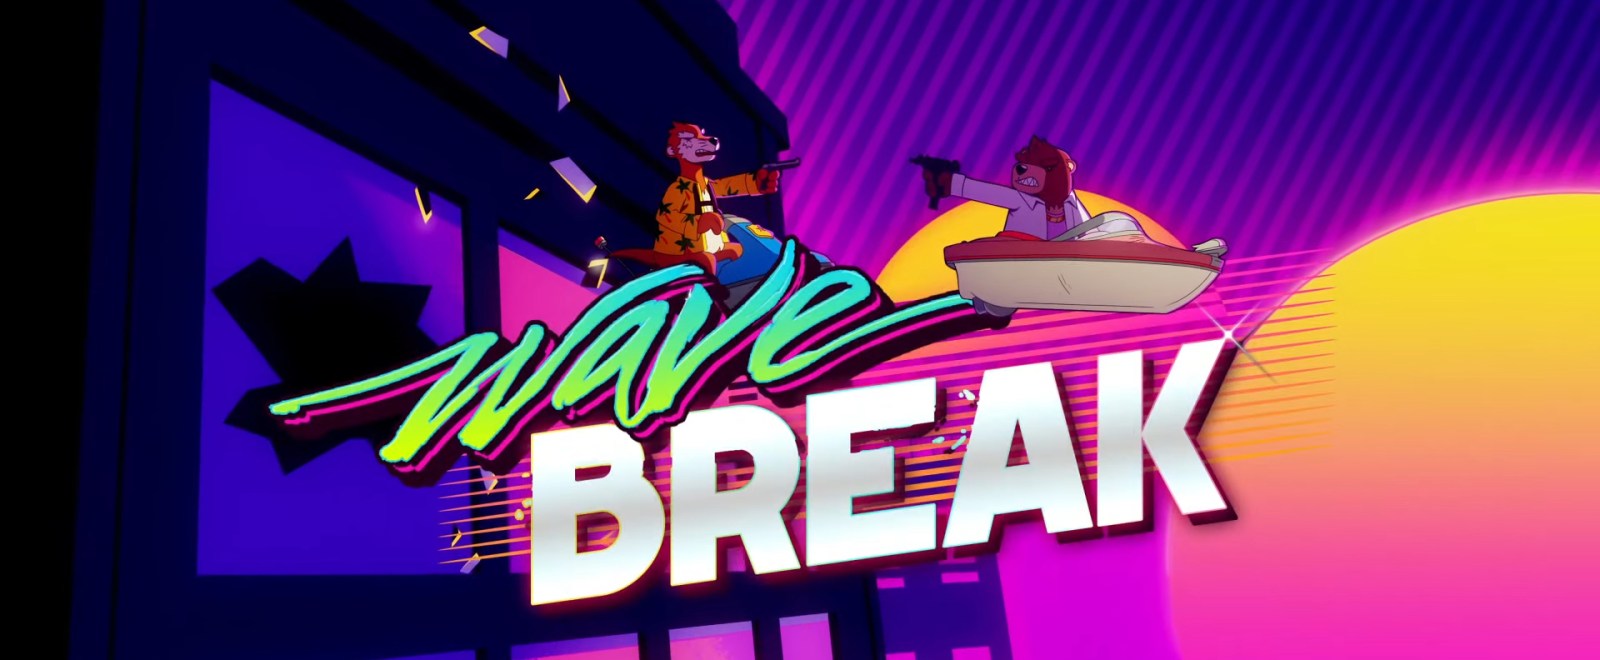 Wave Break Is The World S First Skateboating Game And It Looks Rad As Hell - roblox solar strike game mod pass